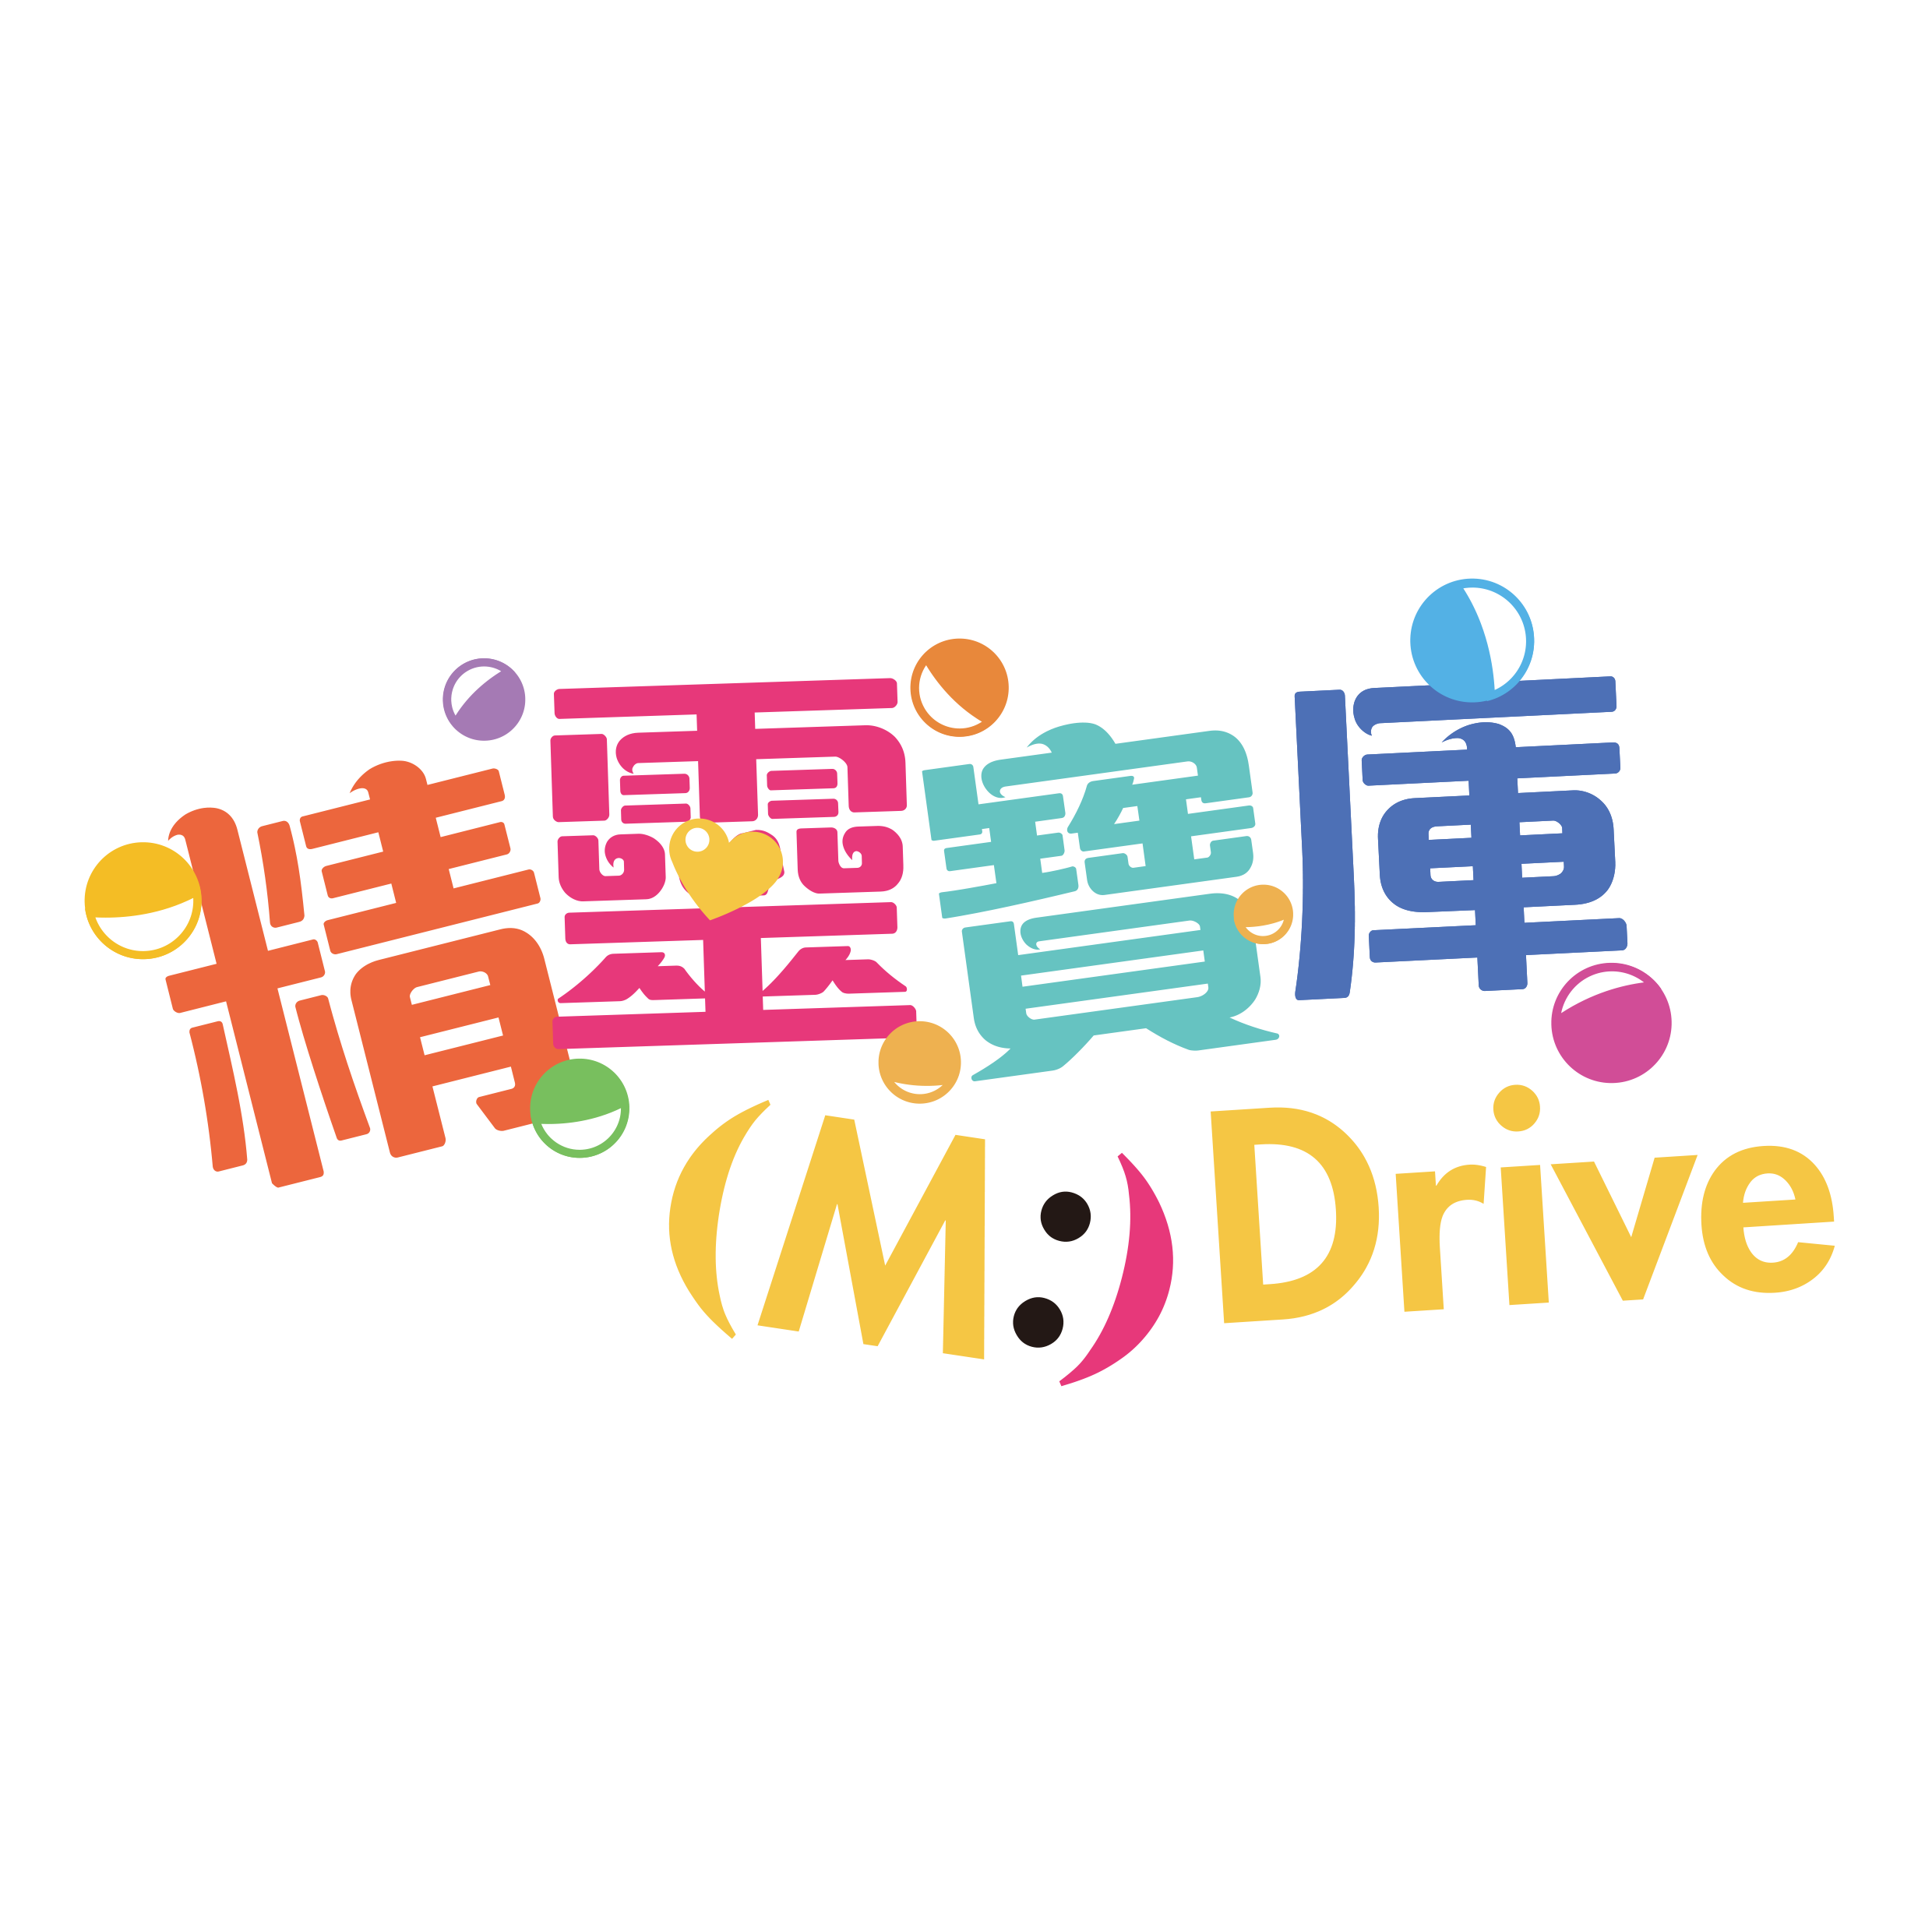 (M:) Drive ~ Mobile Van for Publicity Service on Mental Wellness